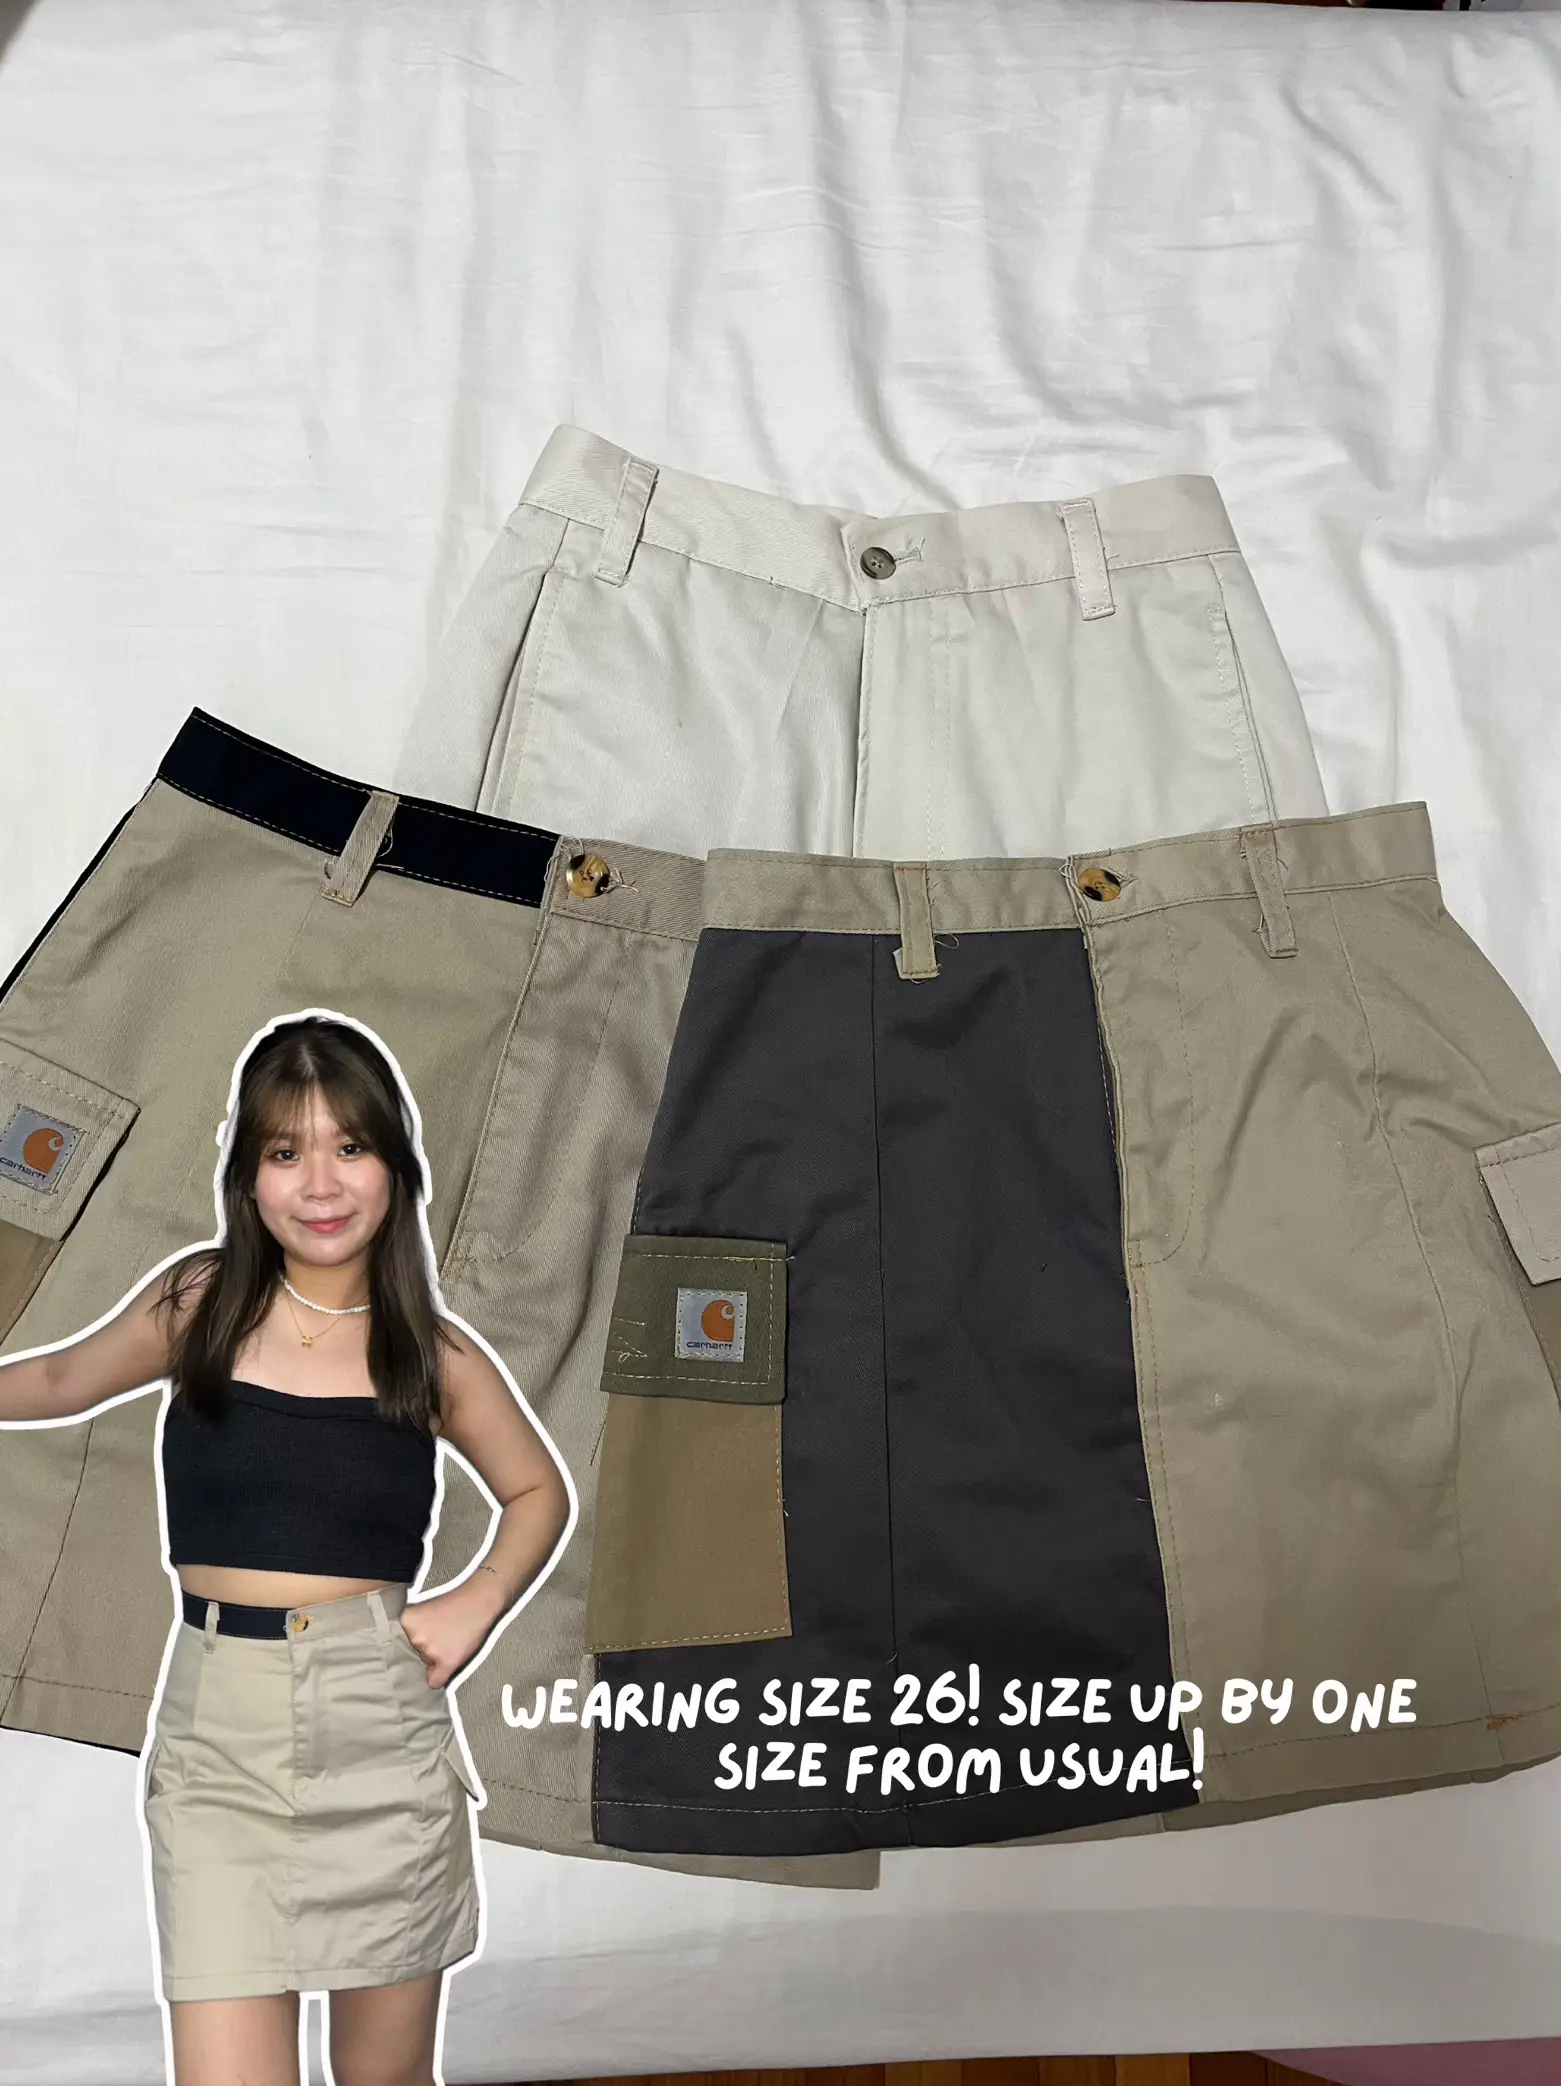 SAVE THIS! $6 CARHARTT REWORKED SKIRT 🇹🇭, Gallery posted by vanessa ˚ʚ♡ɞ